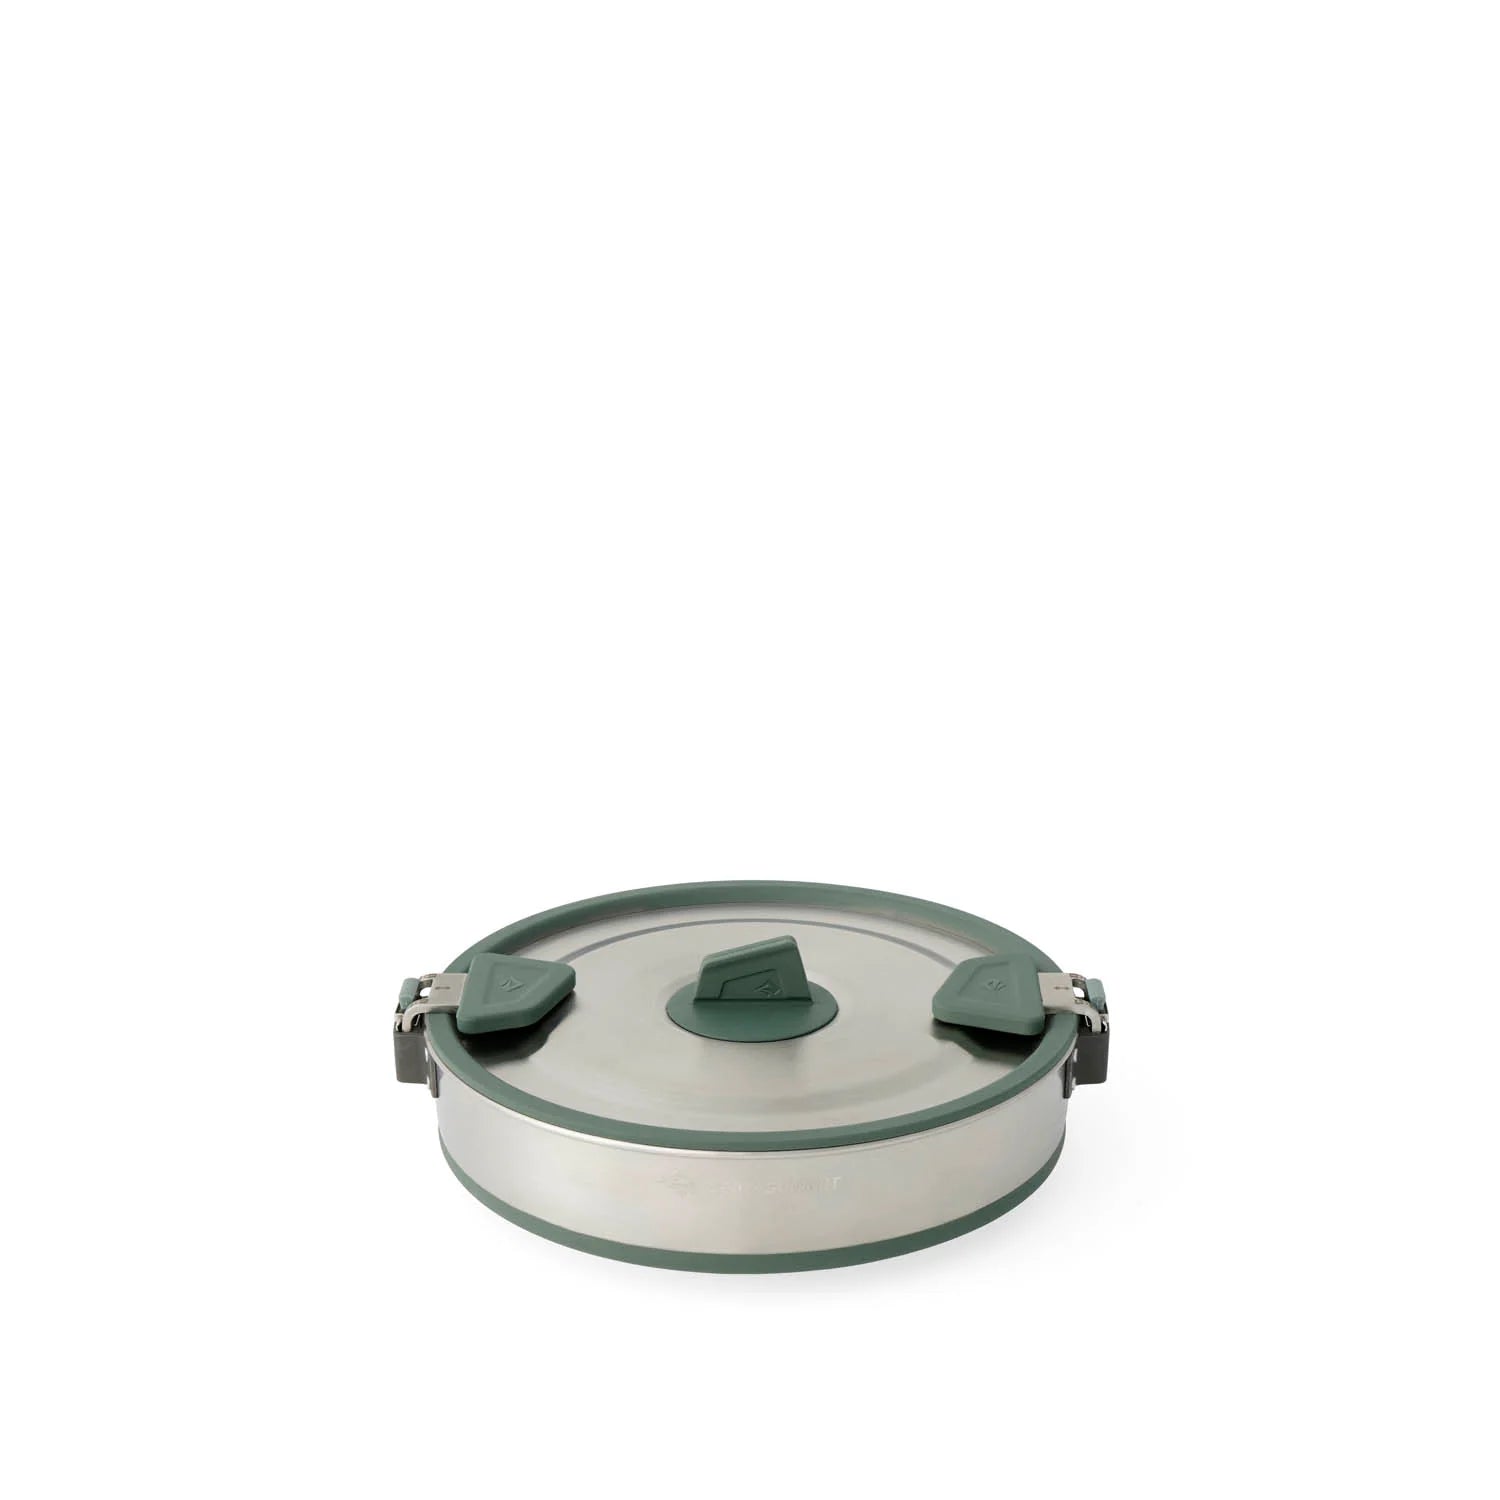 Sea to Summit Detour Stainless Steel Collapsible Pot 3L